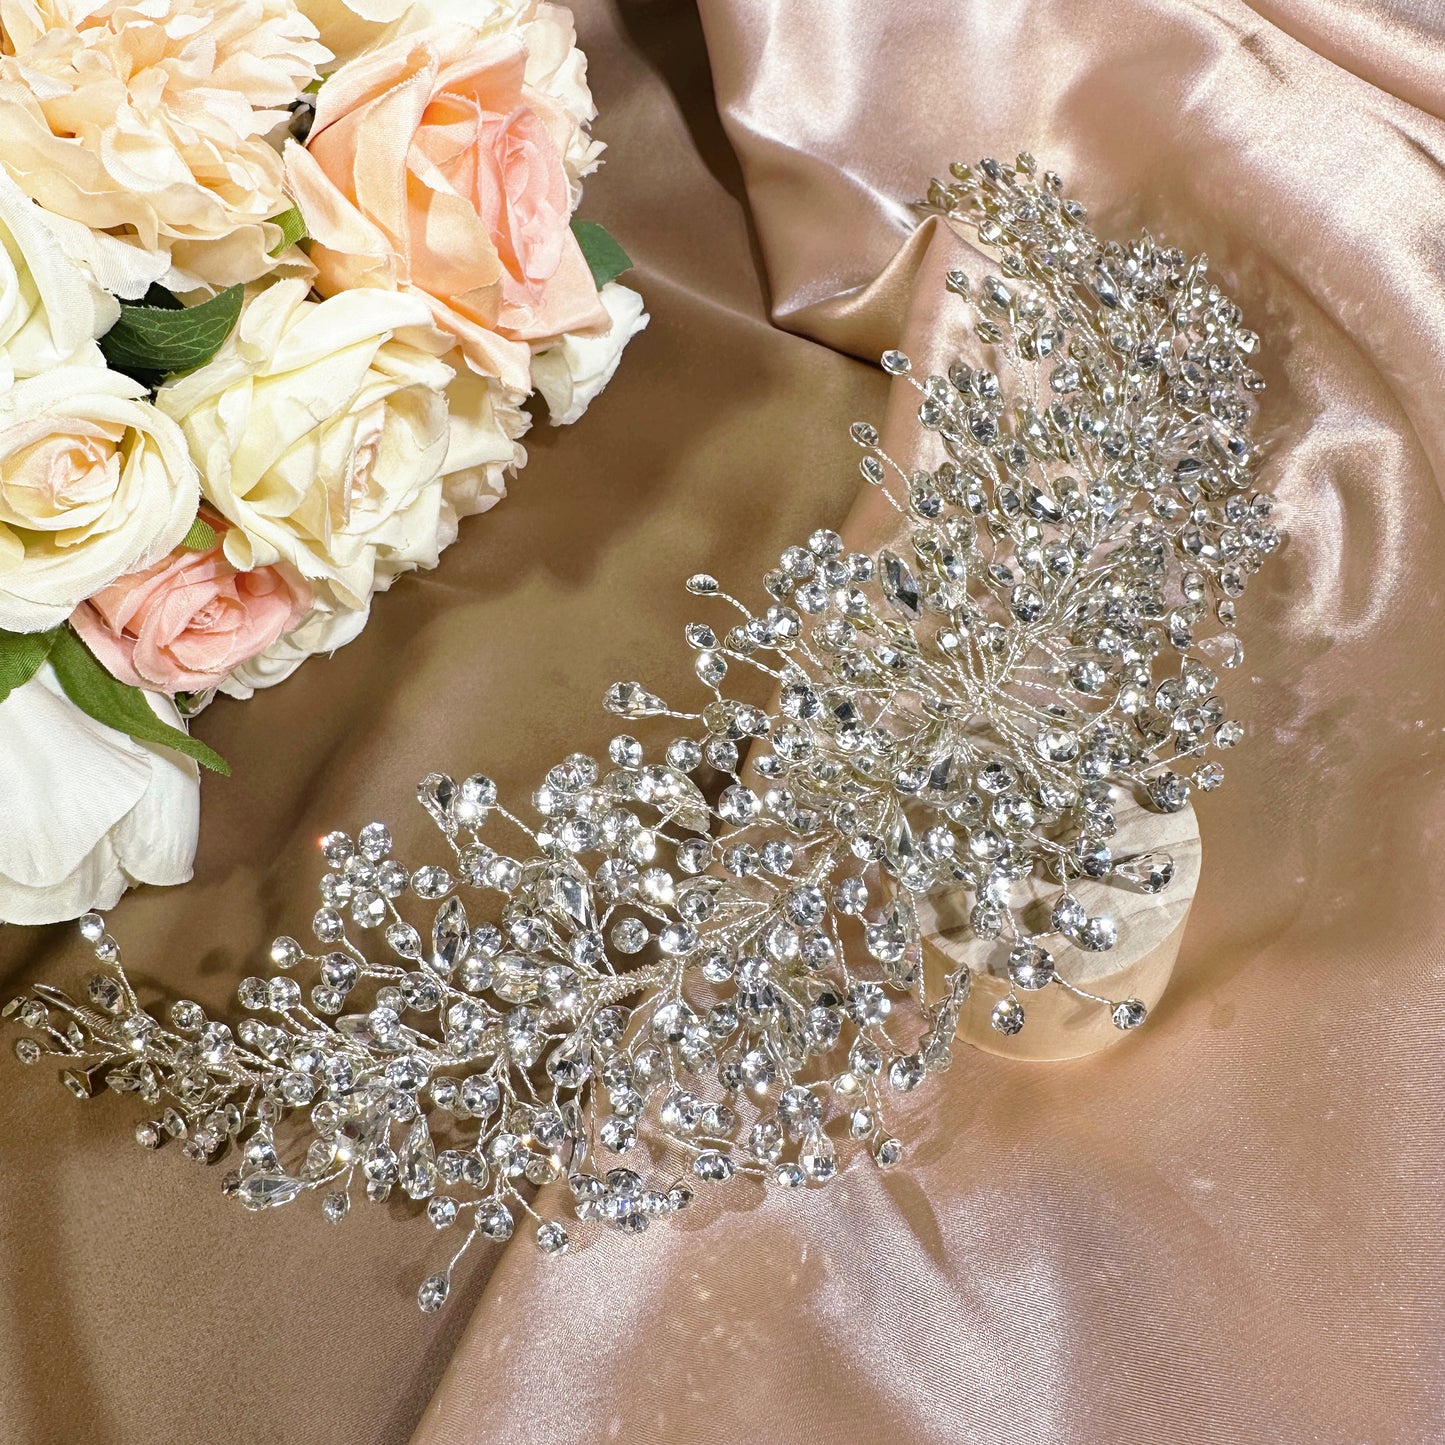 23888934 Make a Statement with Our Stunning Luxury Rhinestone Headpiece for Brides